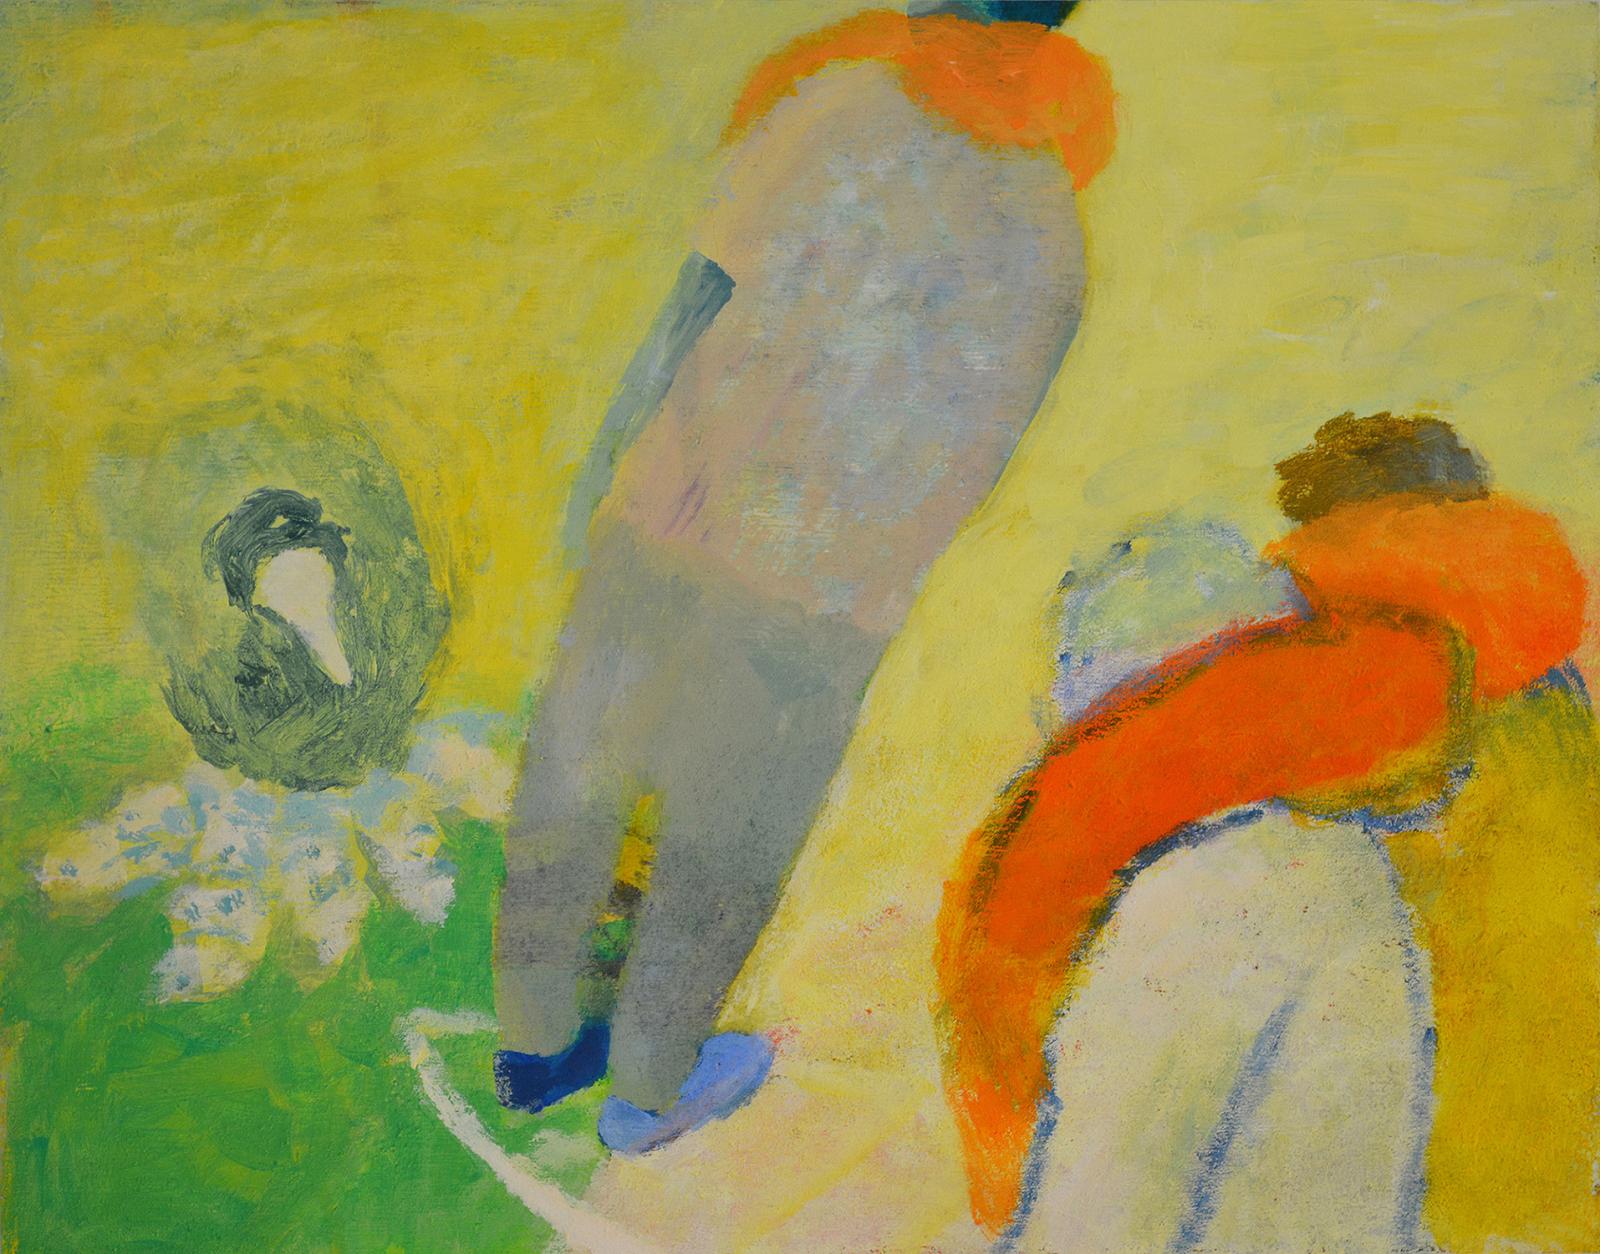 on a light yellow ground with a patch of green in the lower left corner stands a water bird looking at the feet of a human wearing an orange float. the human figure is seen from the back. there are two more humans with orange floats partially shown in the right foreground.